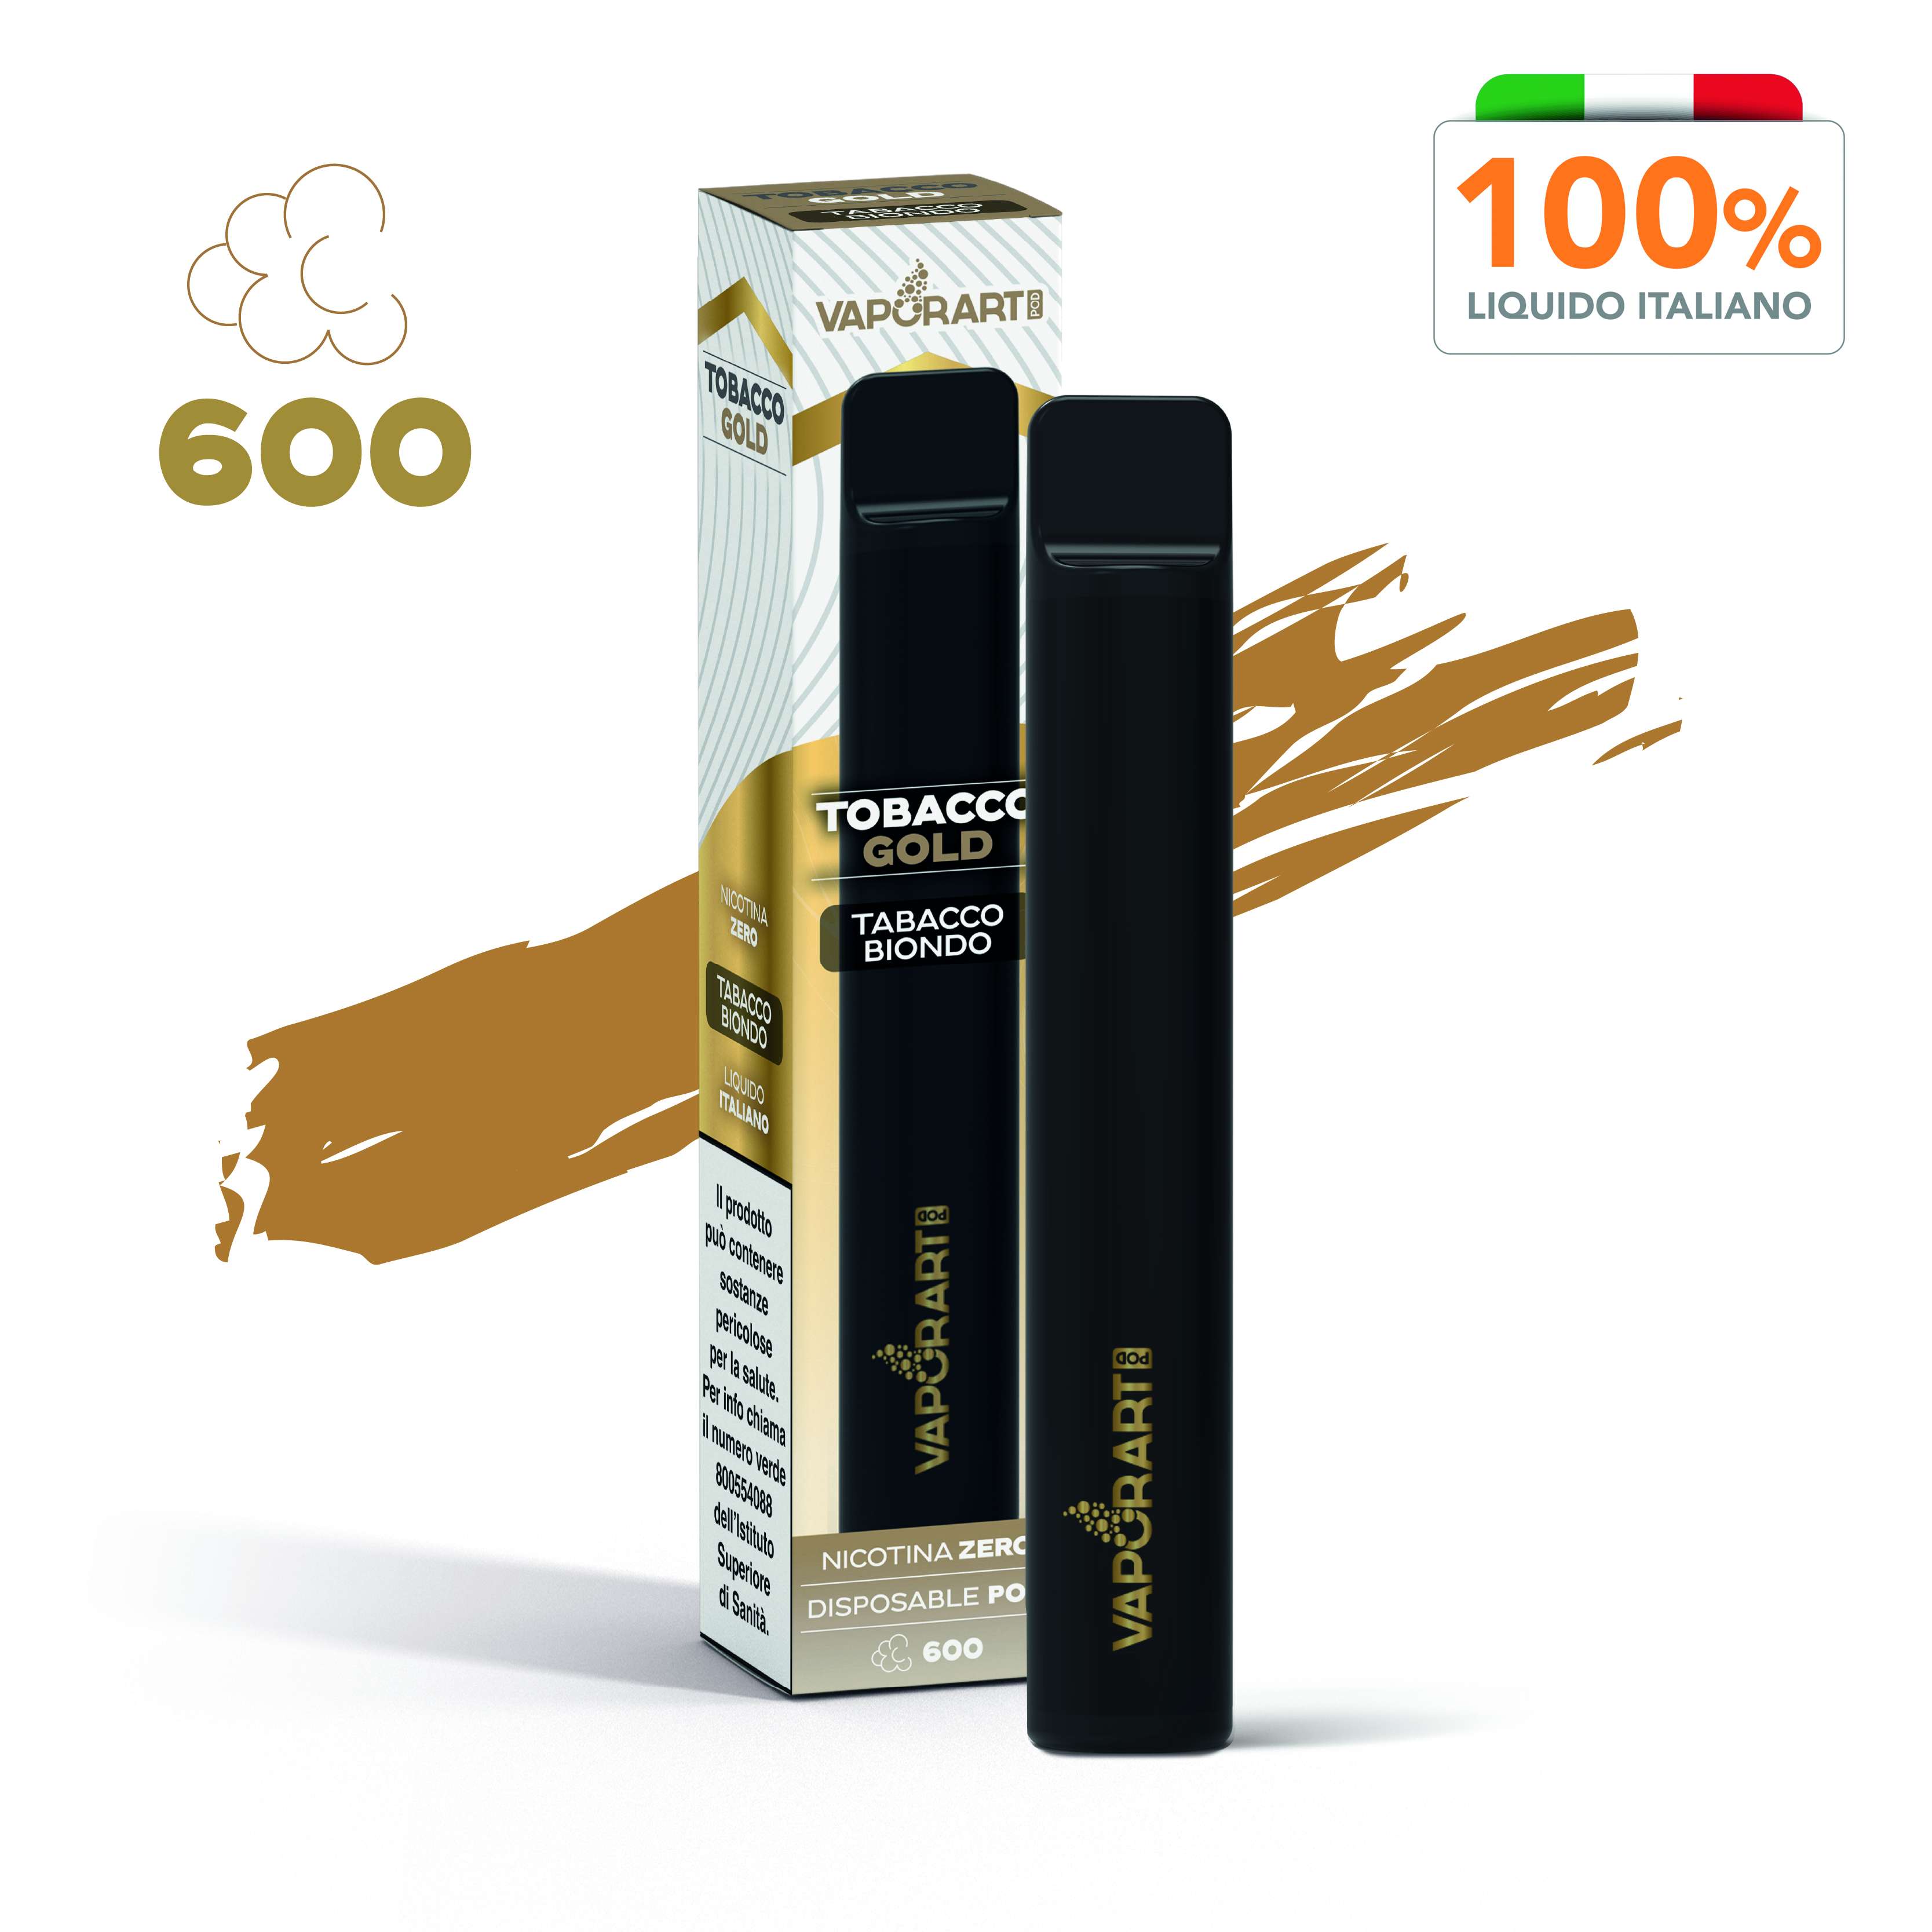 TOBACCO GOLD - Blond tobacco | Vaporart Official Store